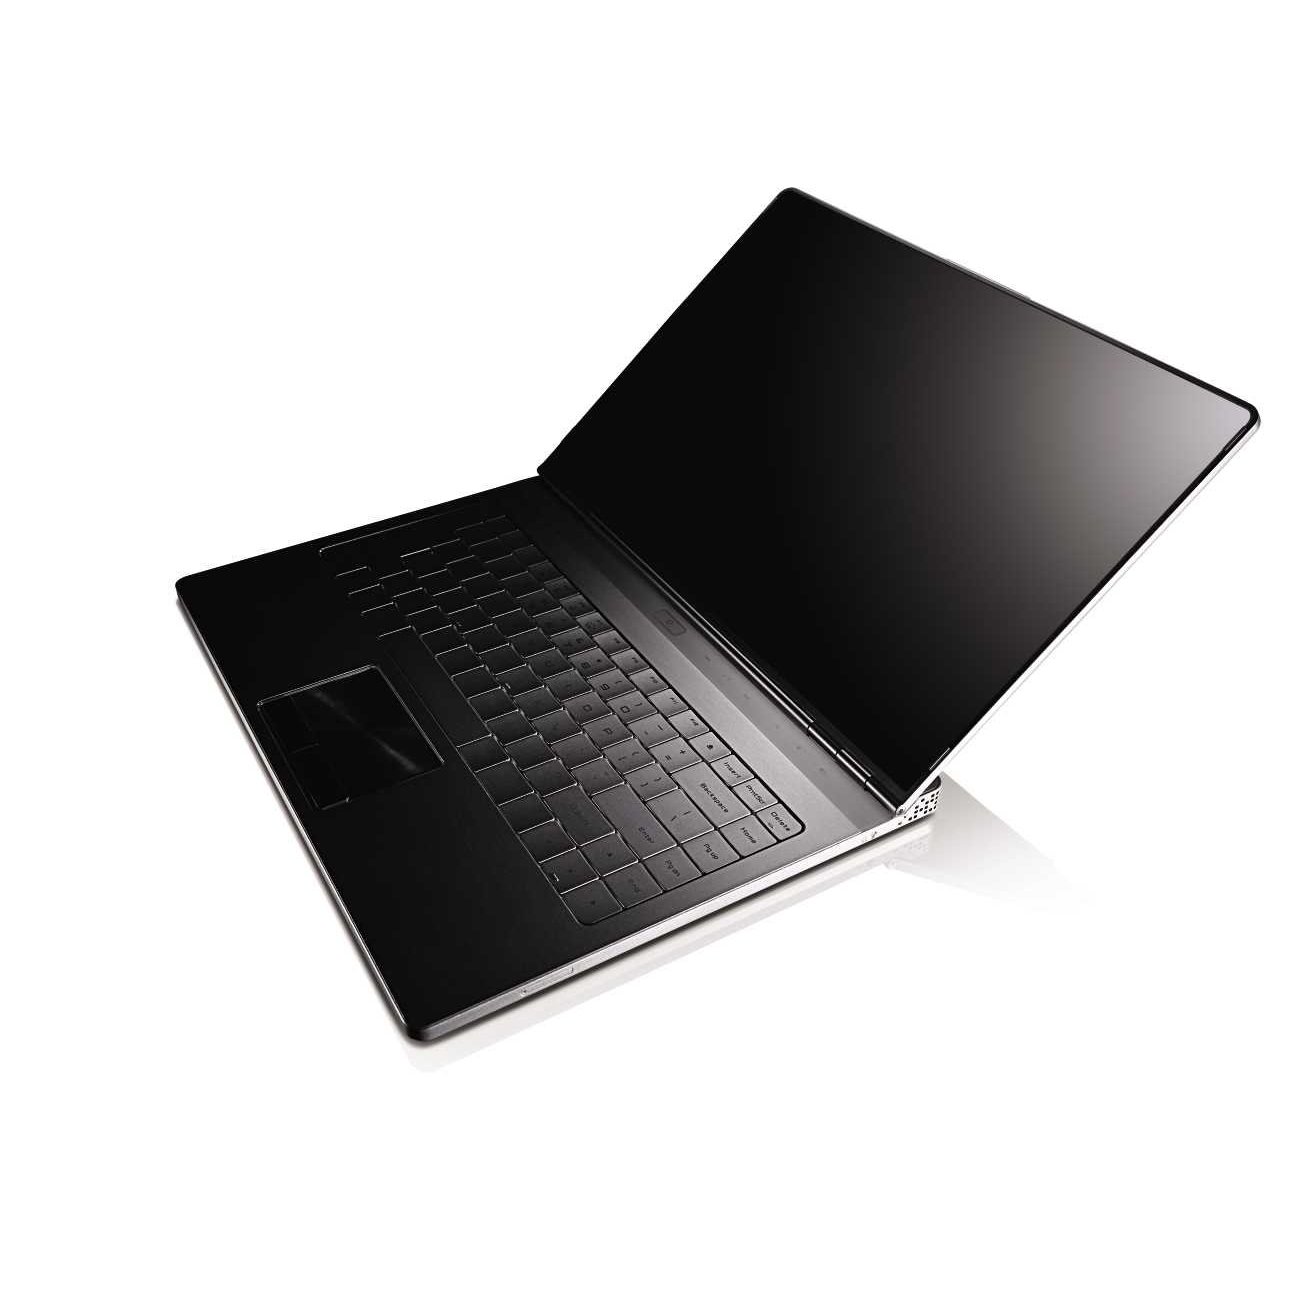 http://thetechjournal.com/wp-content/uploads/images/1111/1320978620-dell-adamo-13-a136349pwh-134inch-laptop-6.jpg